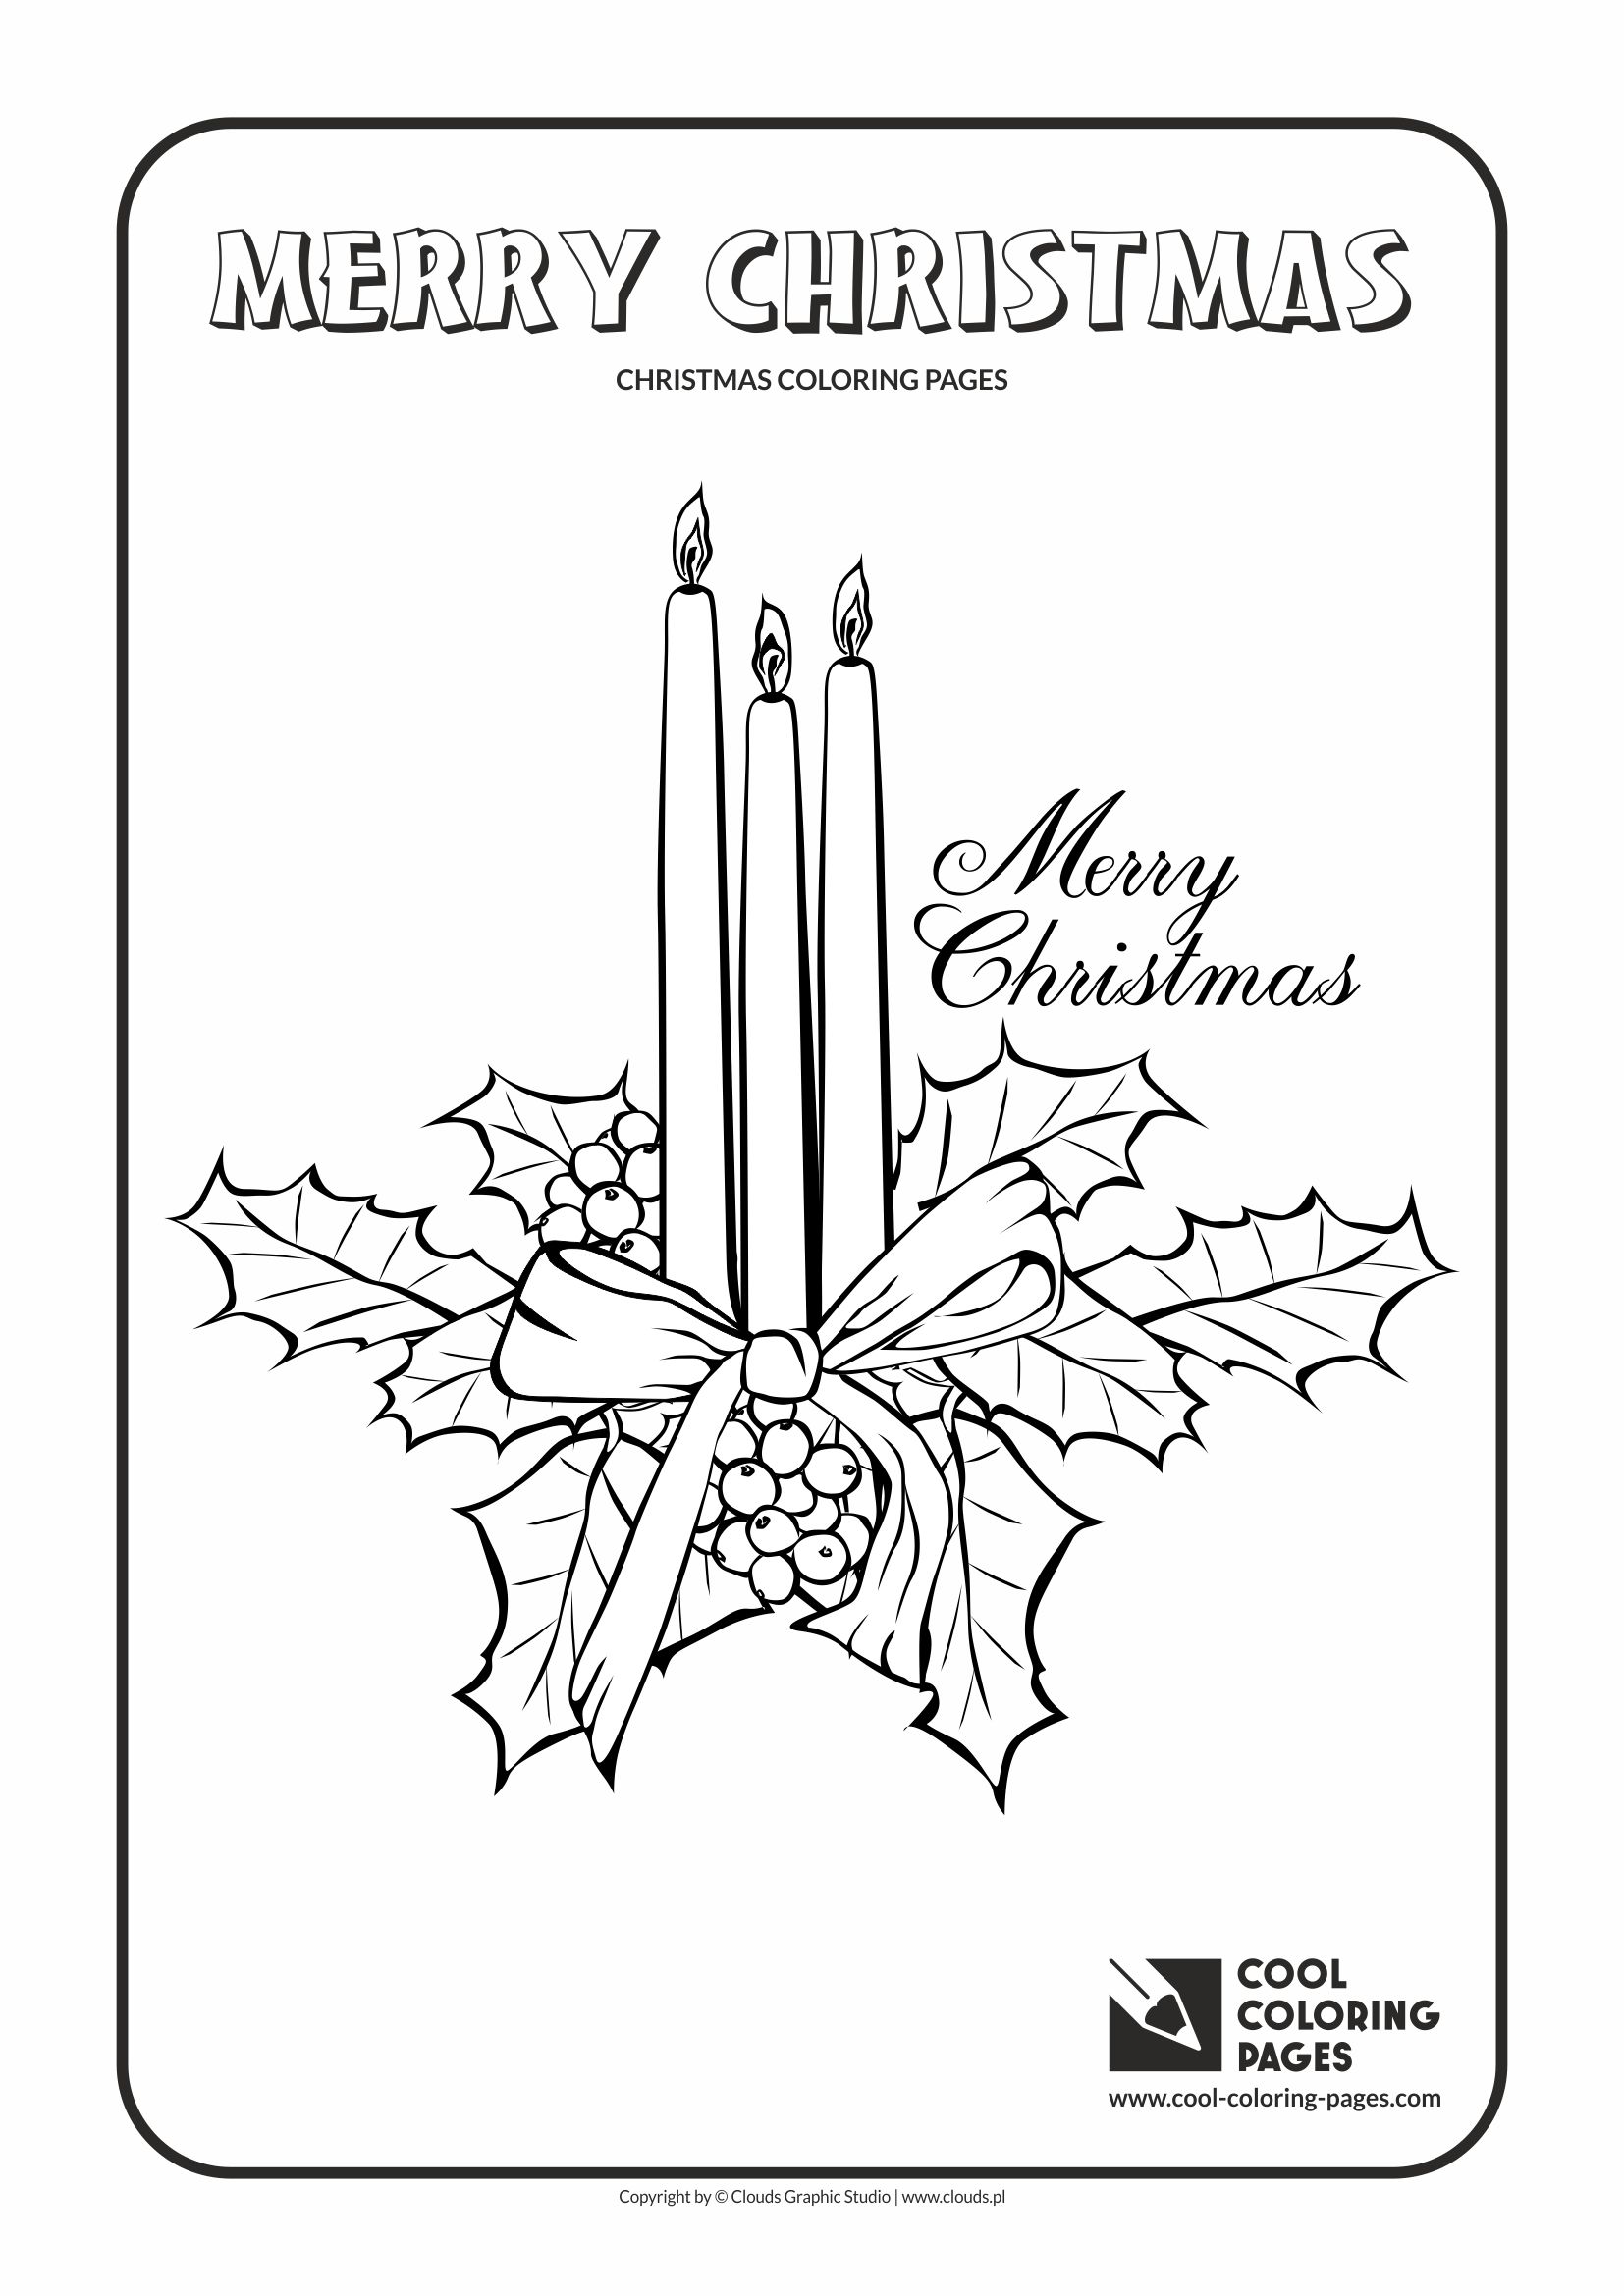 Cool Coloring Pages - Holidays / Christmas candles / Coloring page with Christmas candles